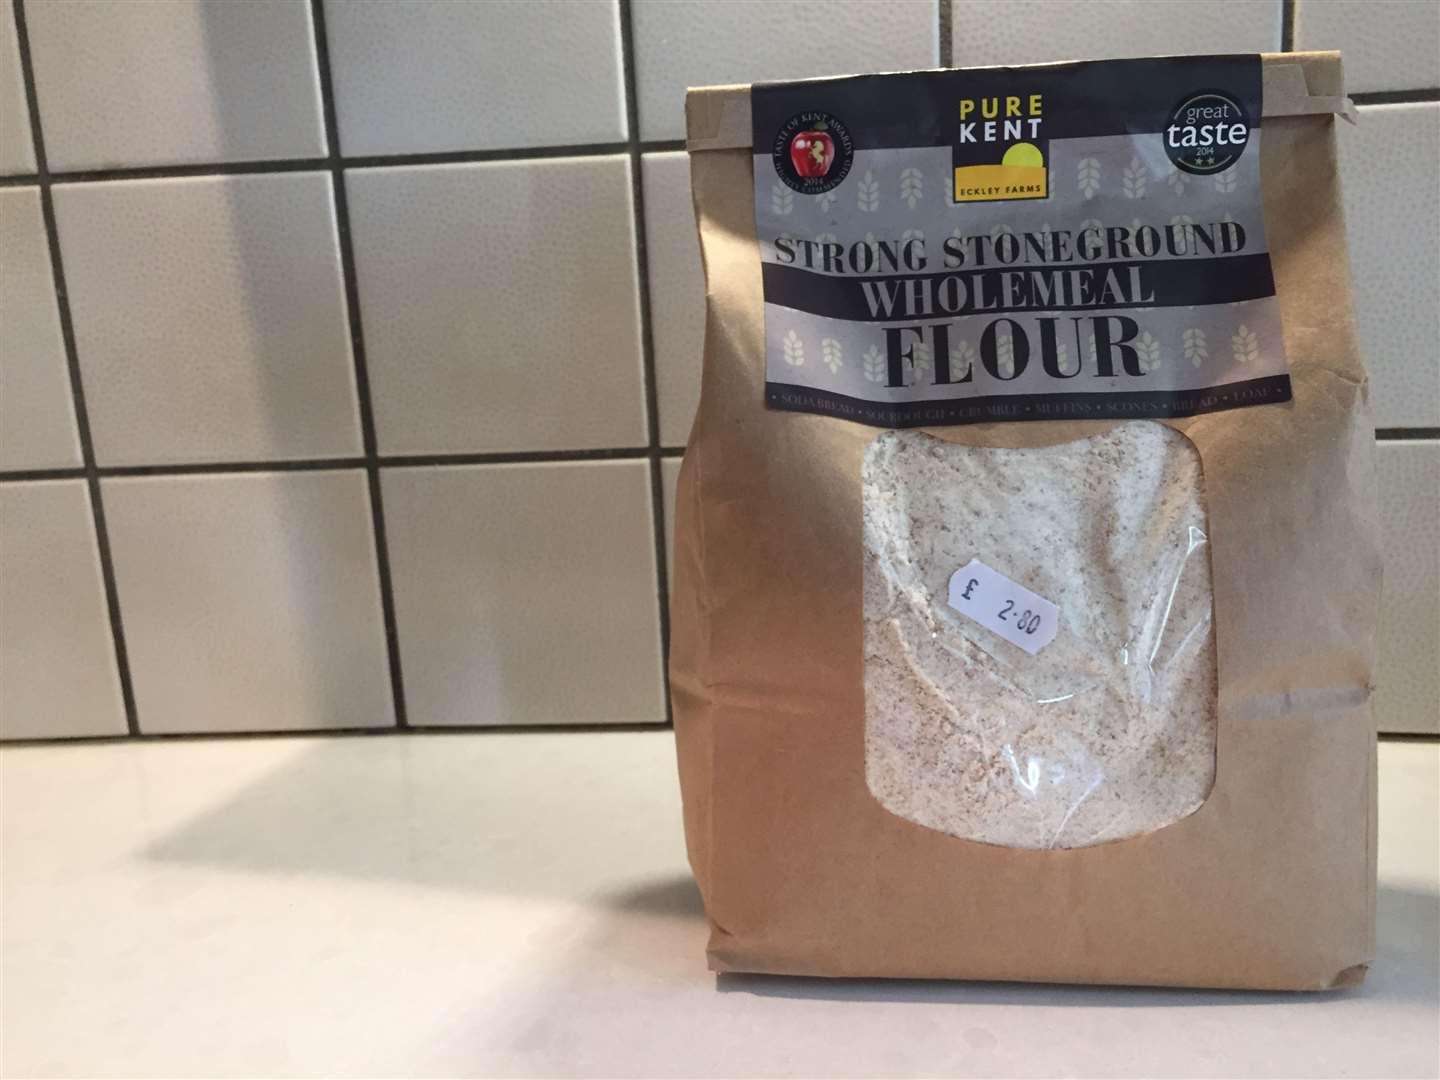 Flour from Pure Kent Eckley Farms - £2.80